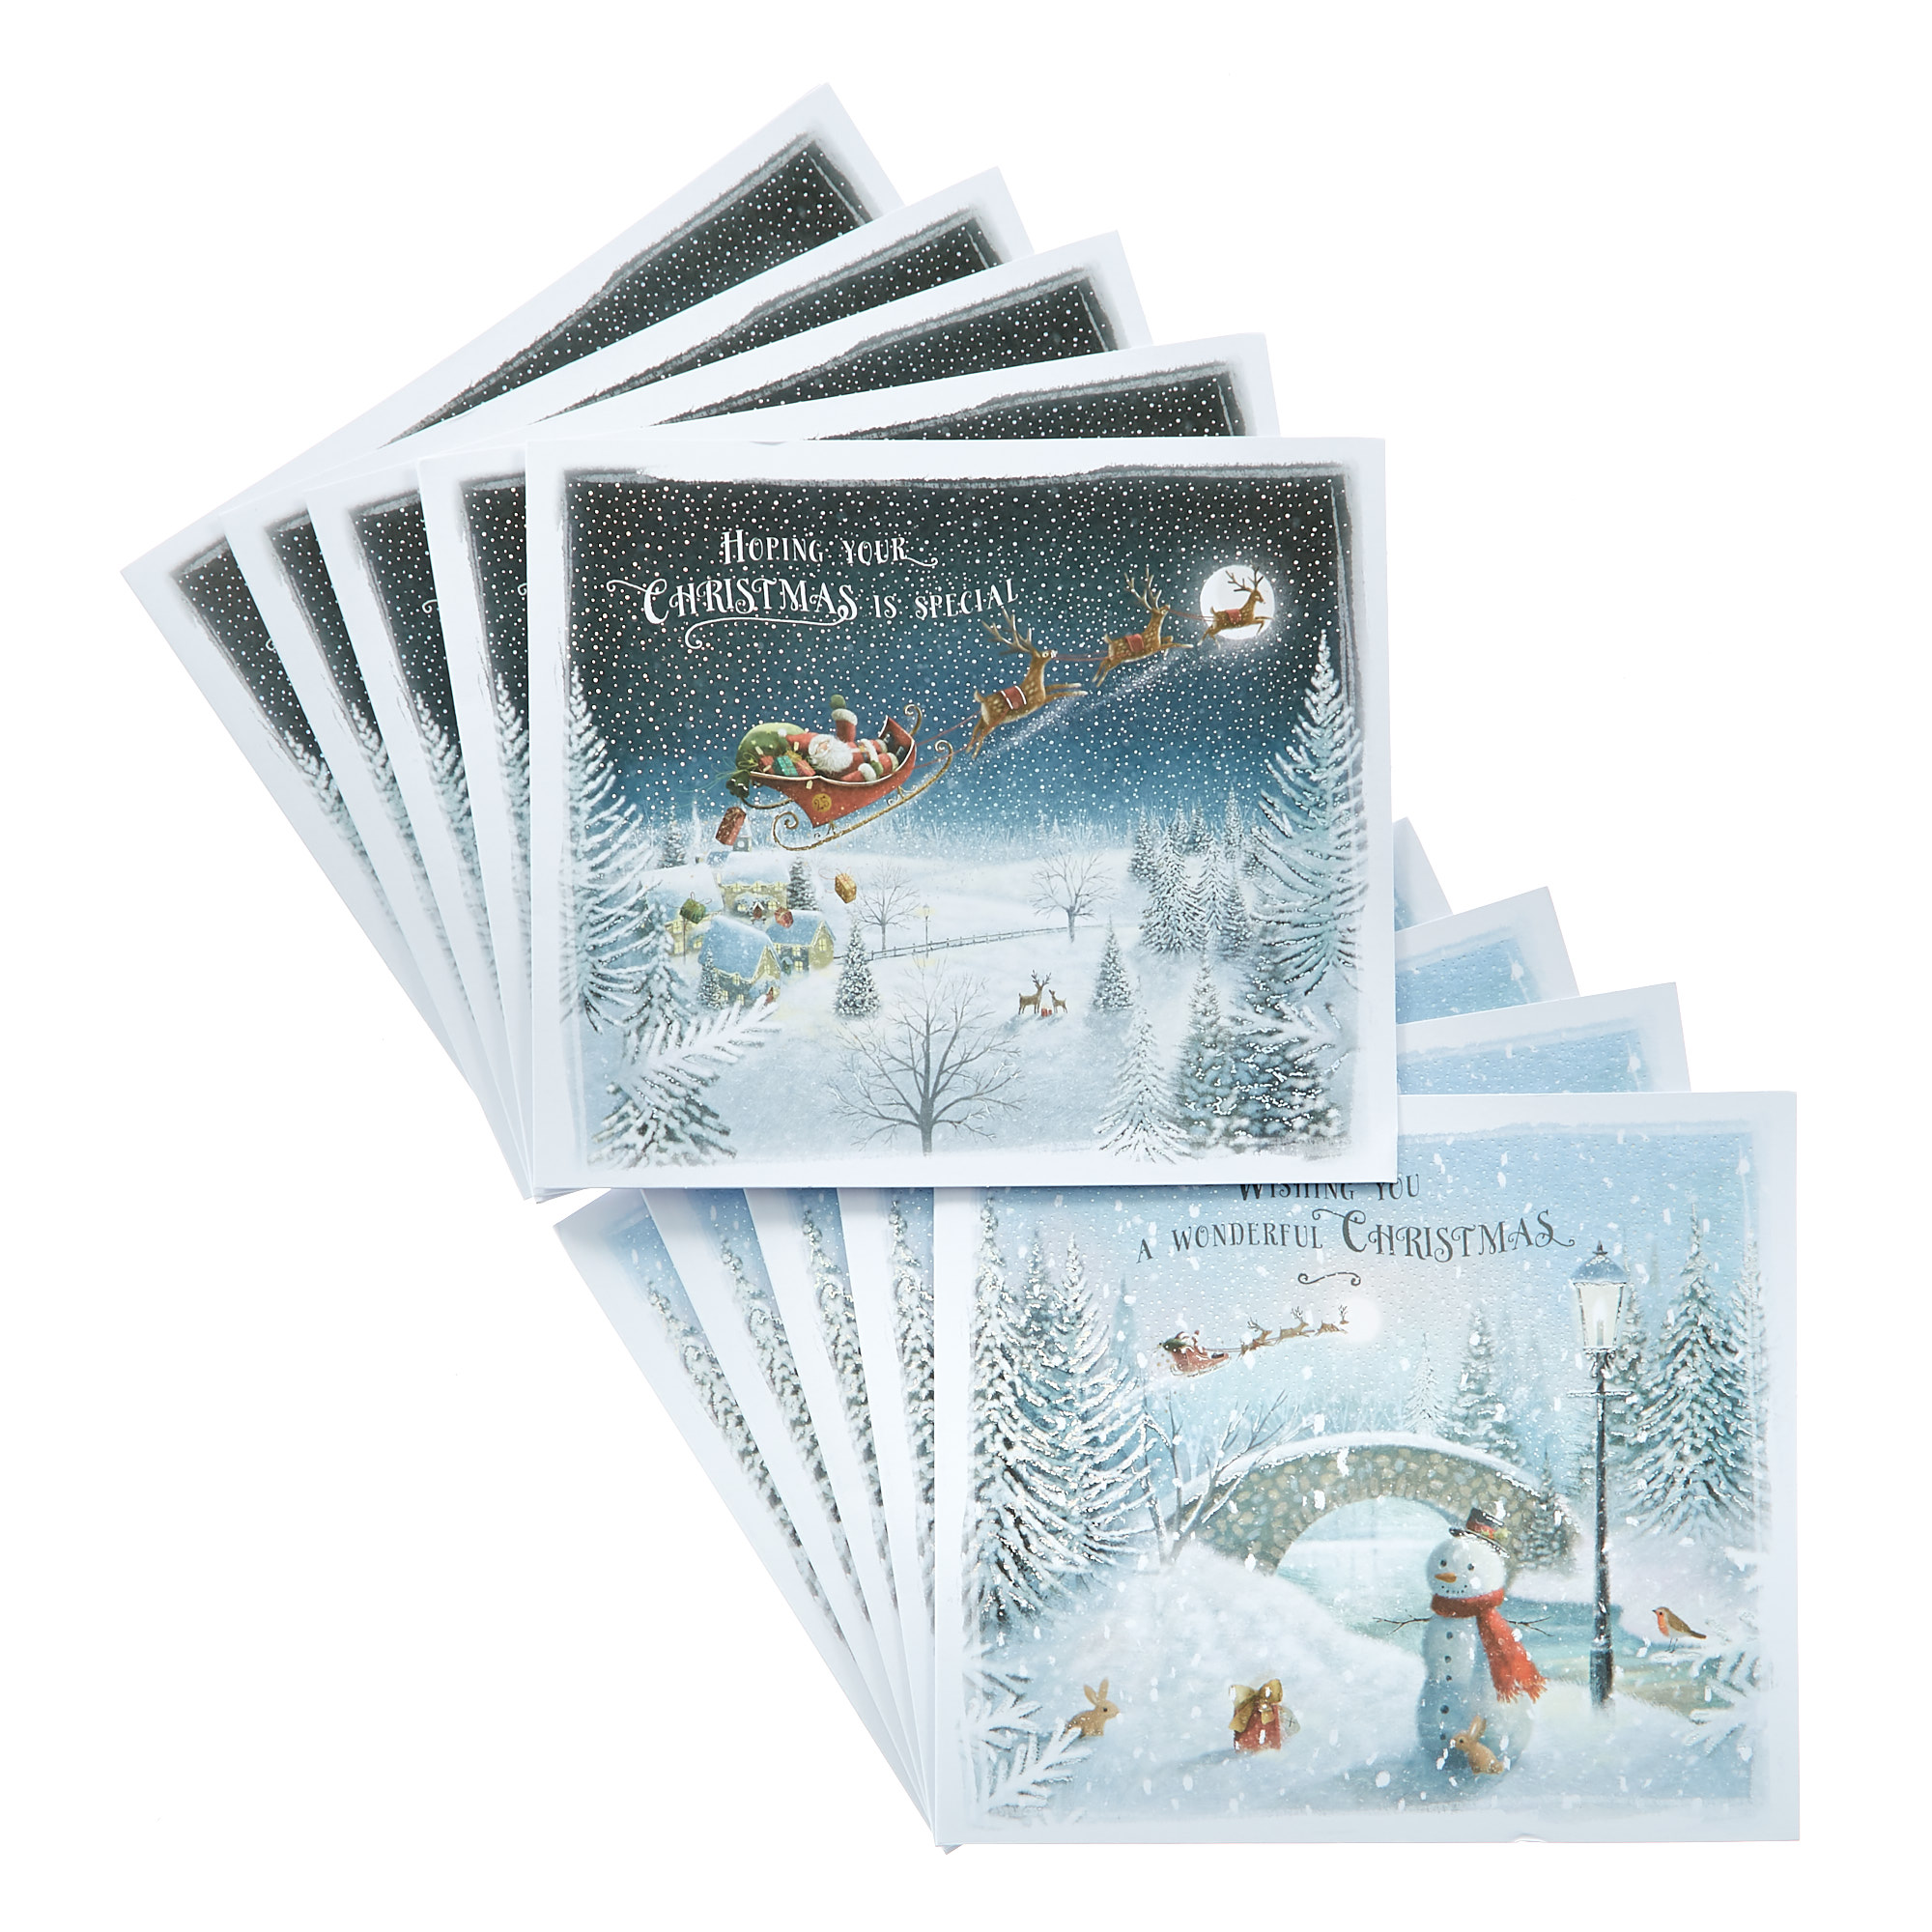 Box of 12 Deluxe Night's Sky Charity Christmas Cards - 2 Designs 